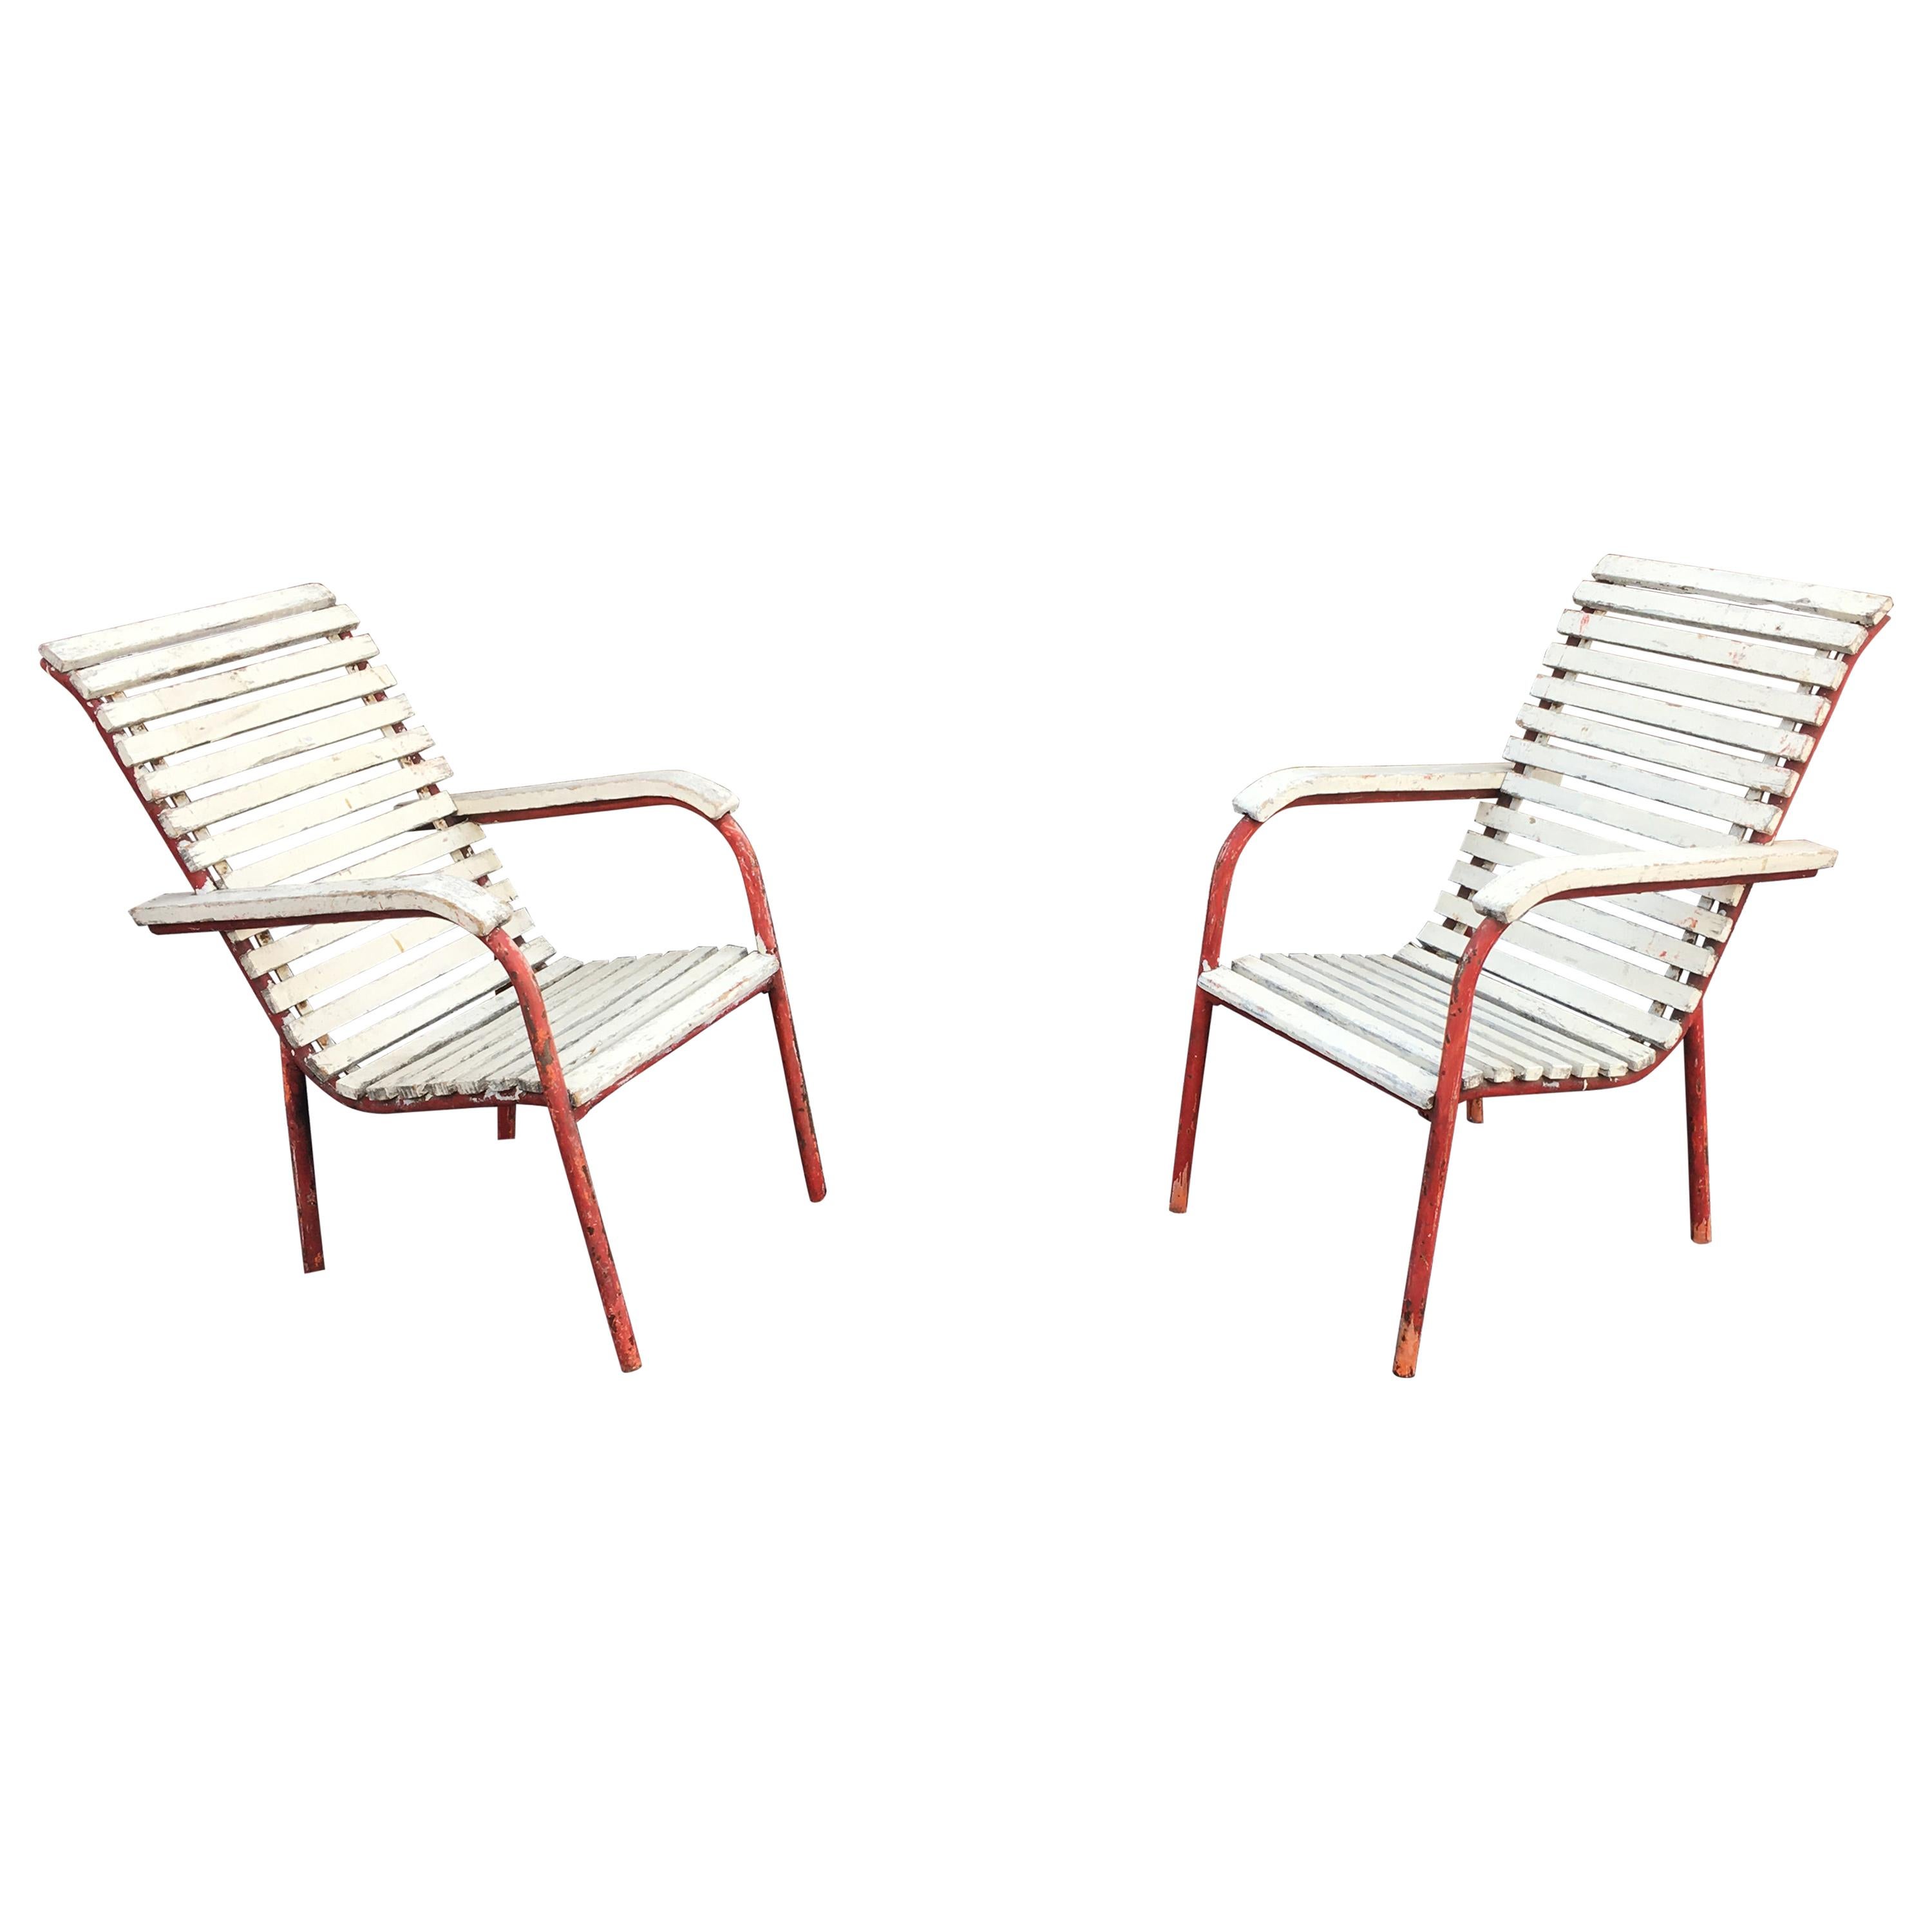 Pair of Modernist Art Deco Armchairs in the Style of Robert Mallet Stevens